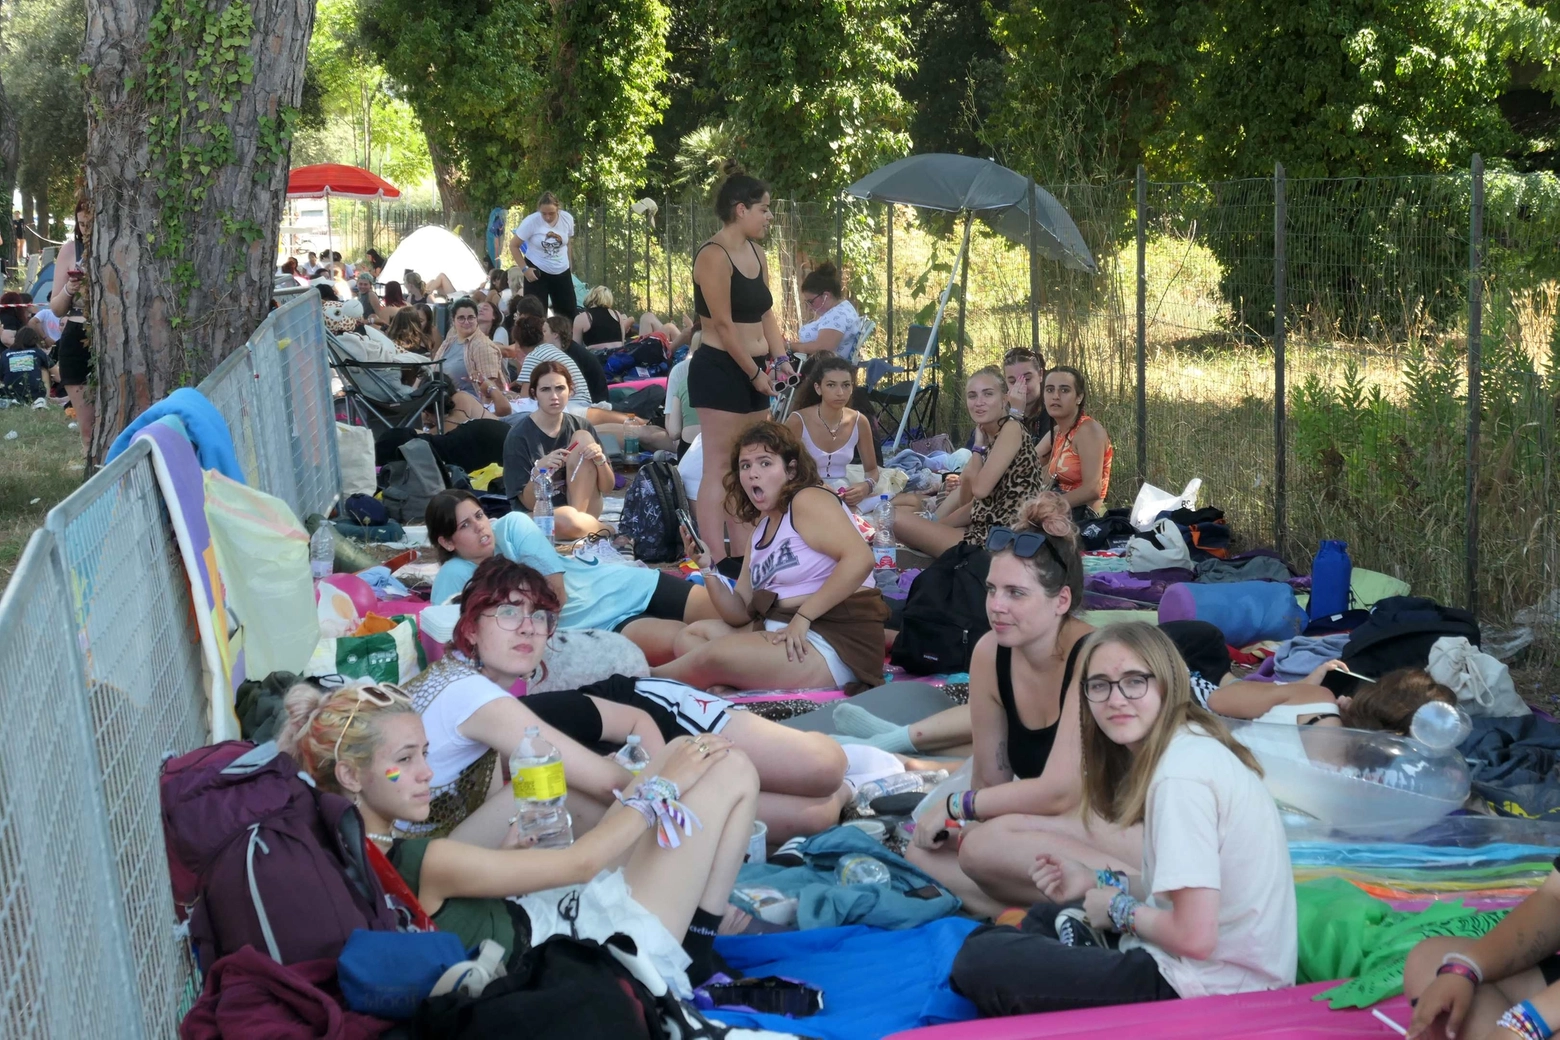 Fans of Louis Tomlinson camping in Lido di Camaiore (photo by Umicini)